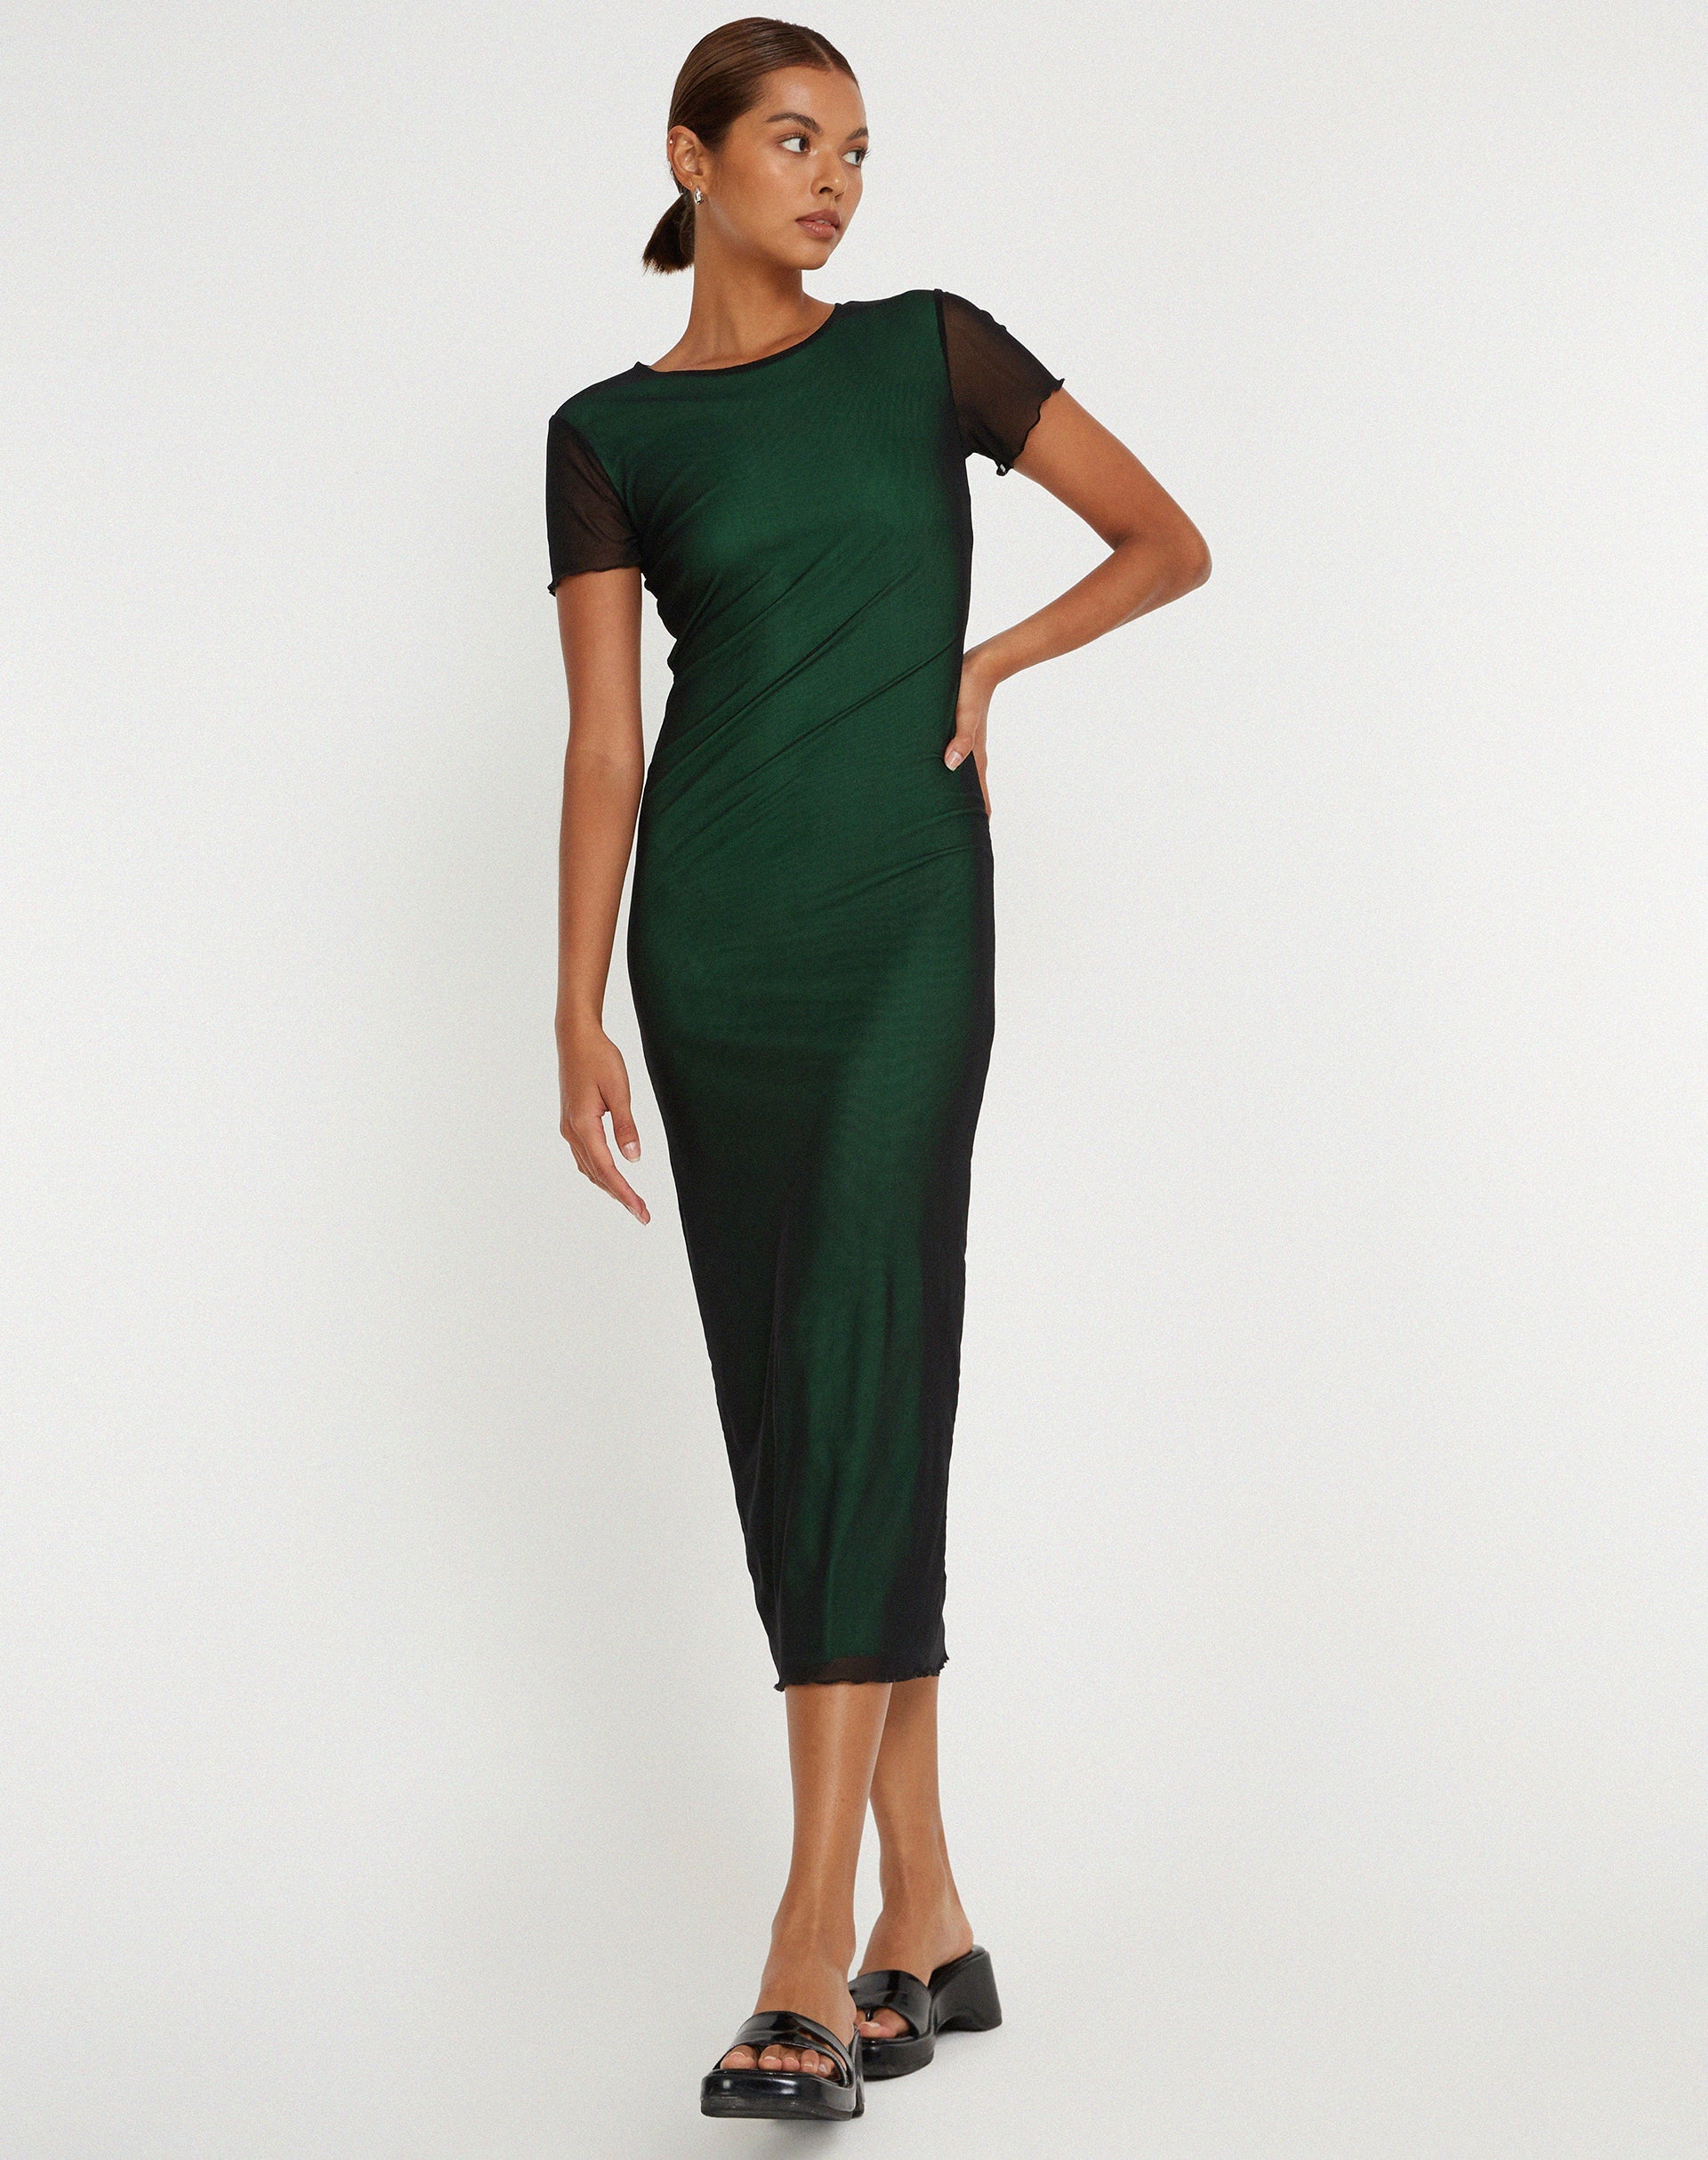 image of Roska Midi Dress in Black with Vibrant Green Lining